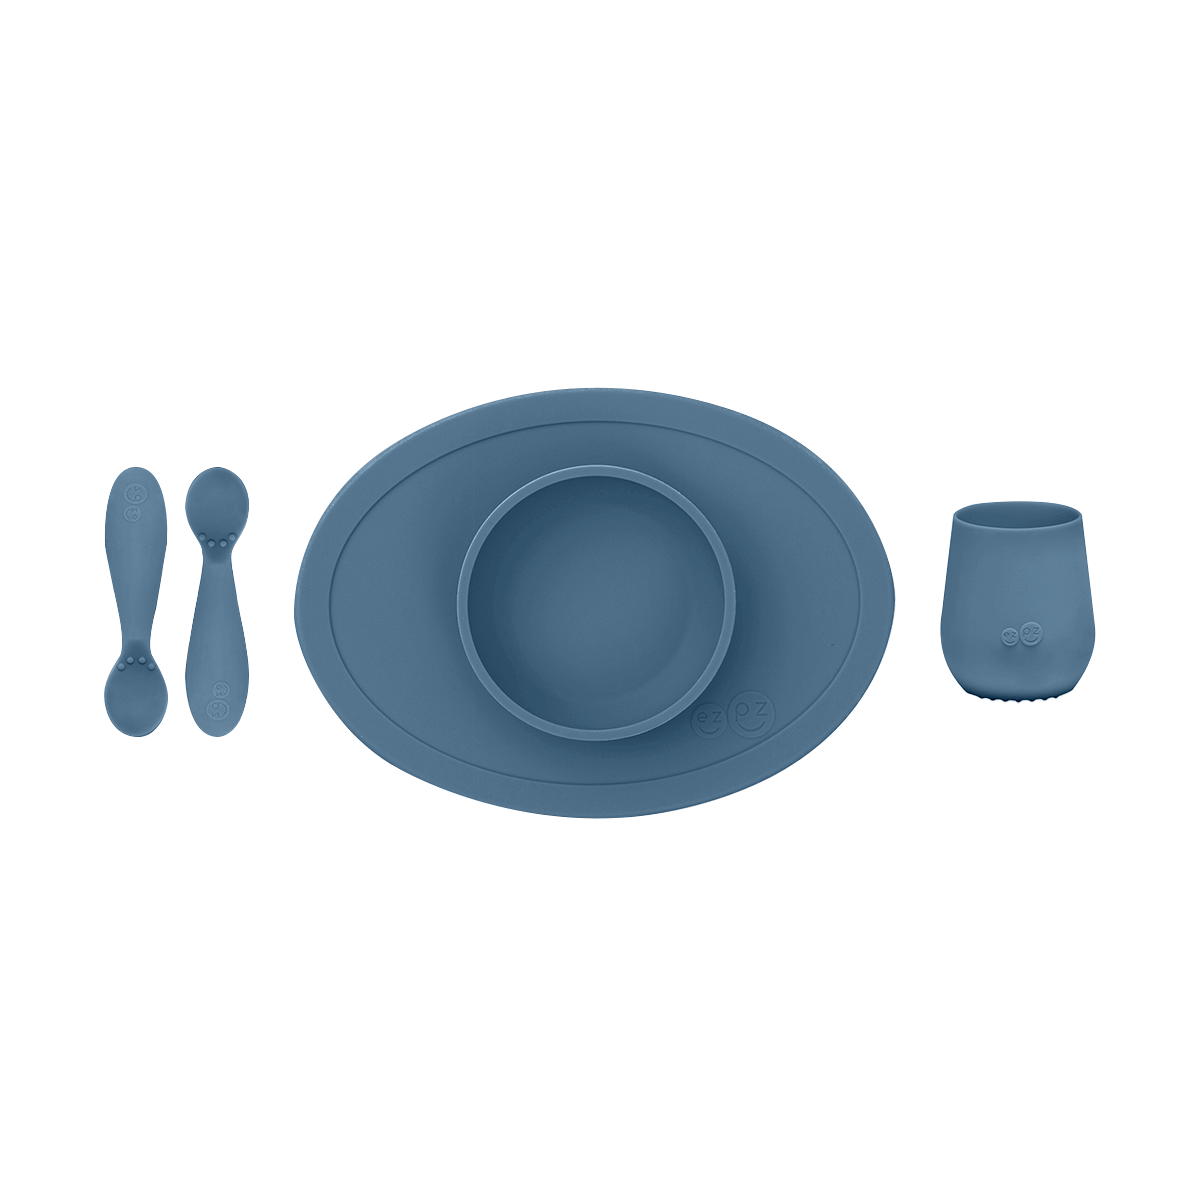 First Foods Set in Indigo by ezpz / The Original All-In-One Silicone Plates & Placemats that Stick to the Table